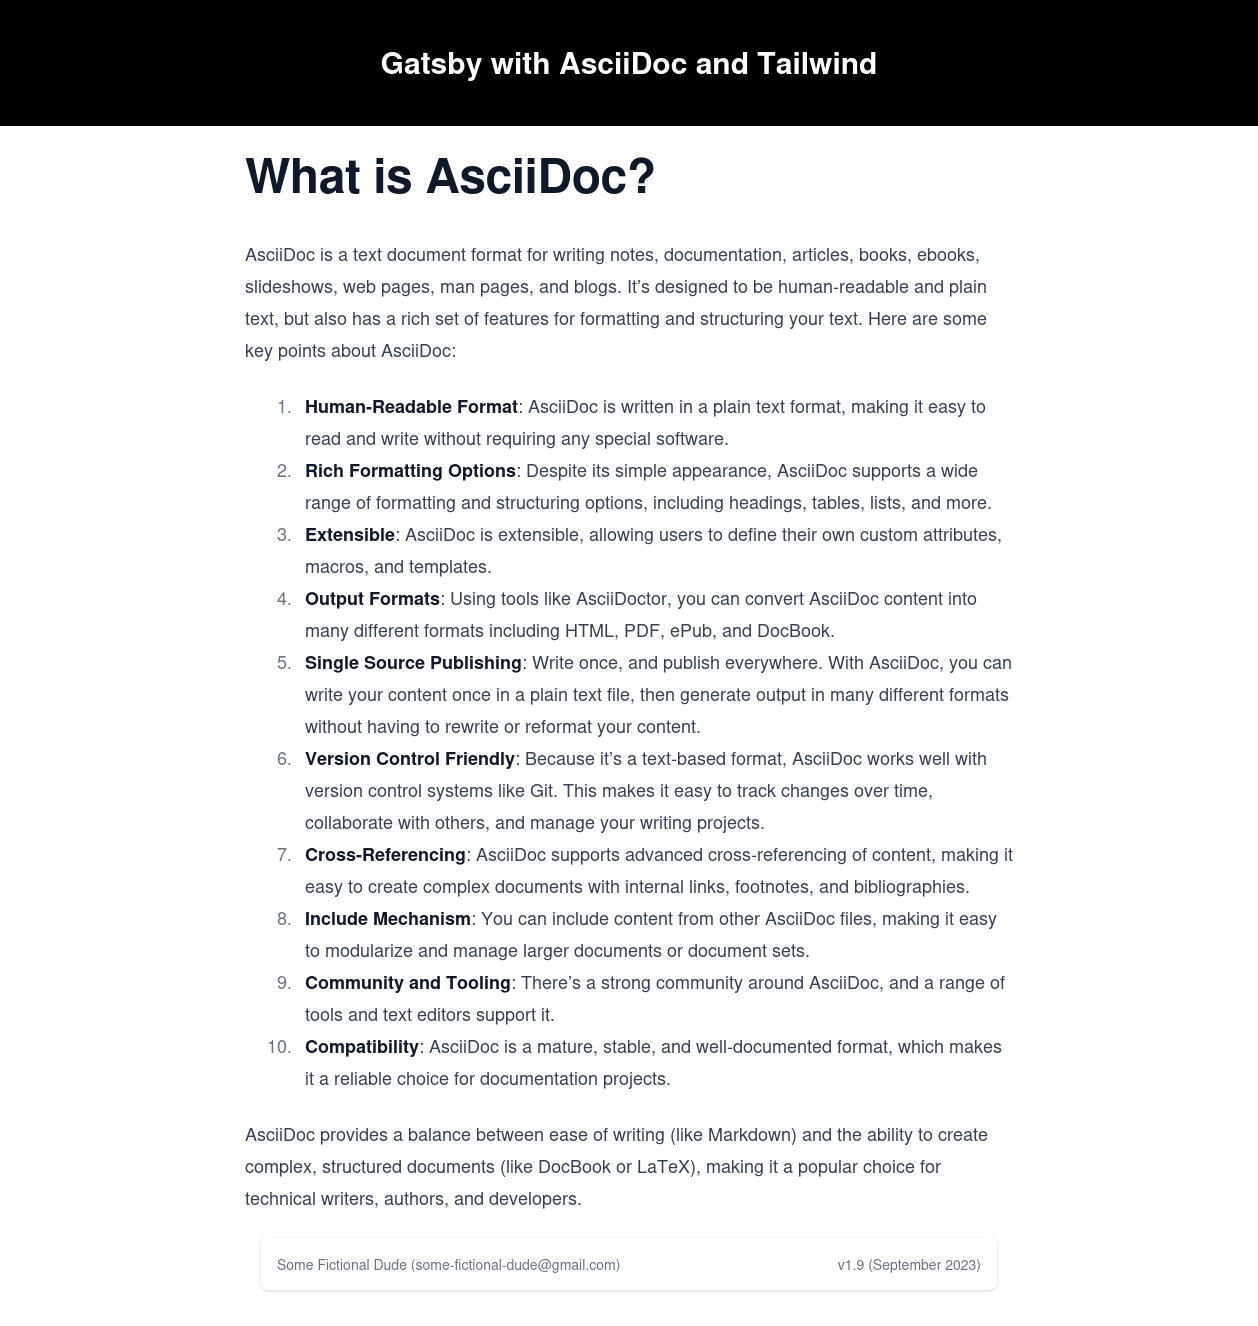 Gatsby test site 'What is AsciiDoc?' page.